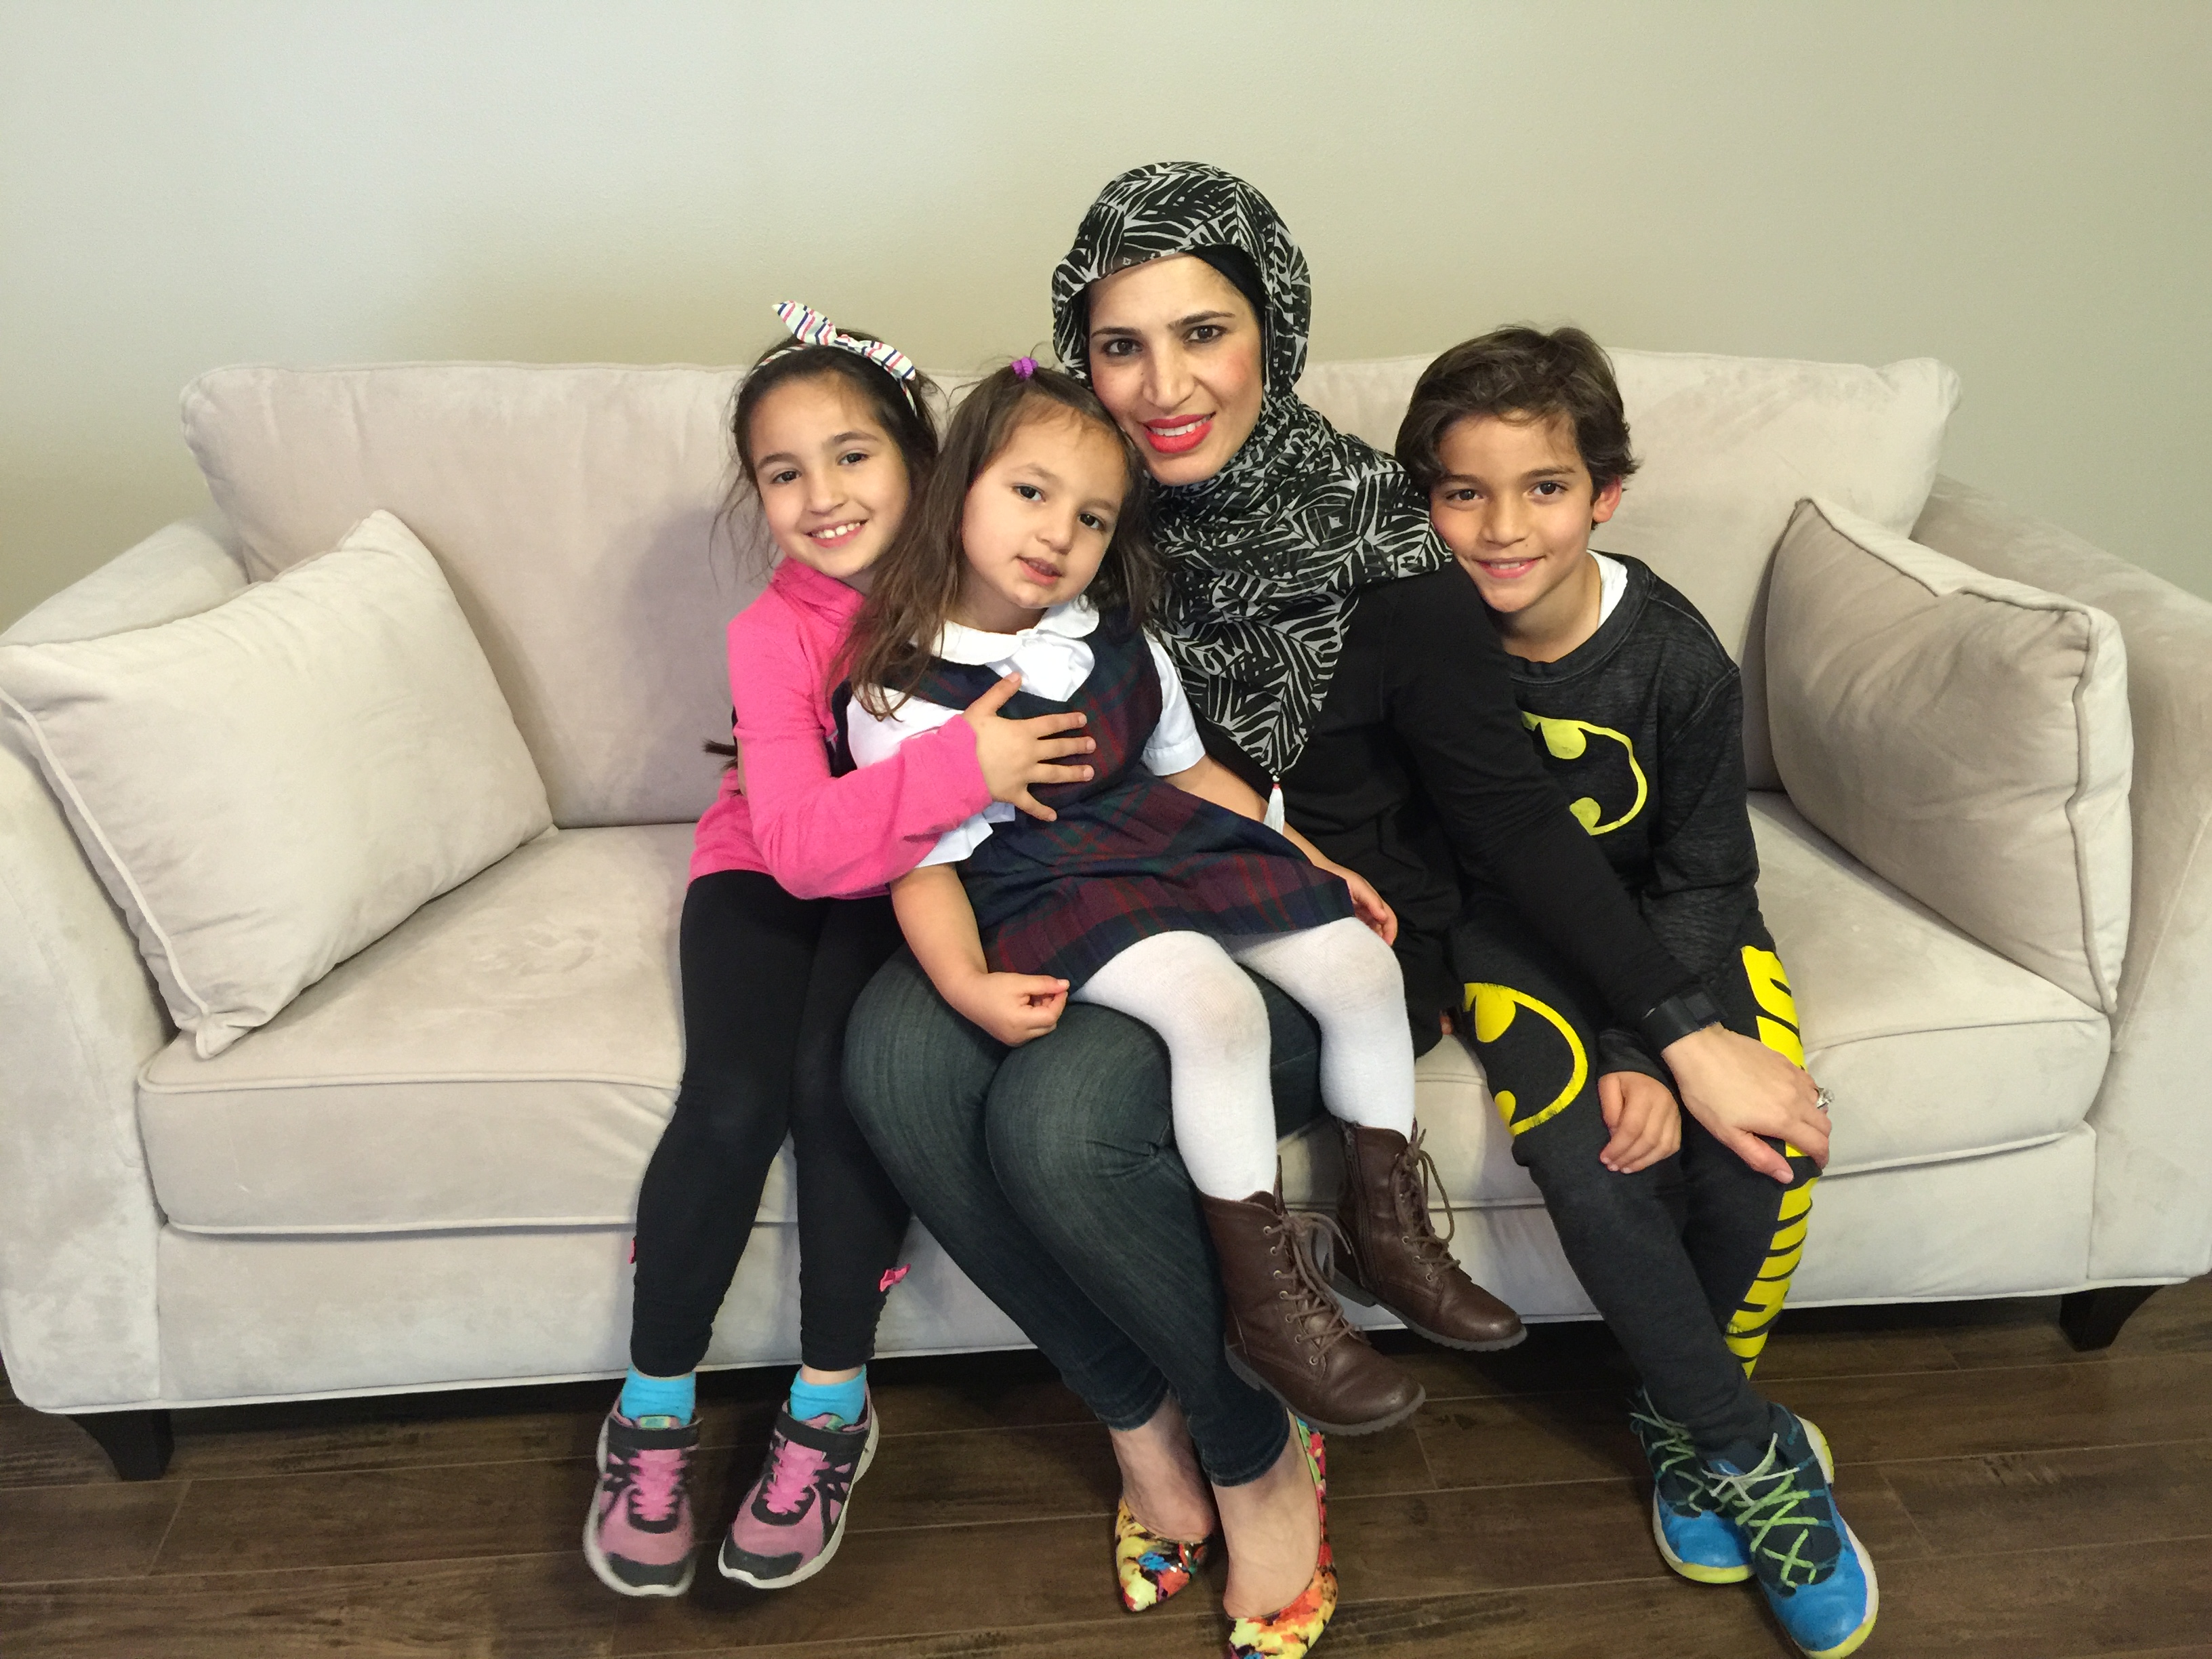 Mirvette has encouraged her children to appreciate both their American and Arab cultures. They pray together five times a day and speak fluent Arabic. 